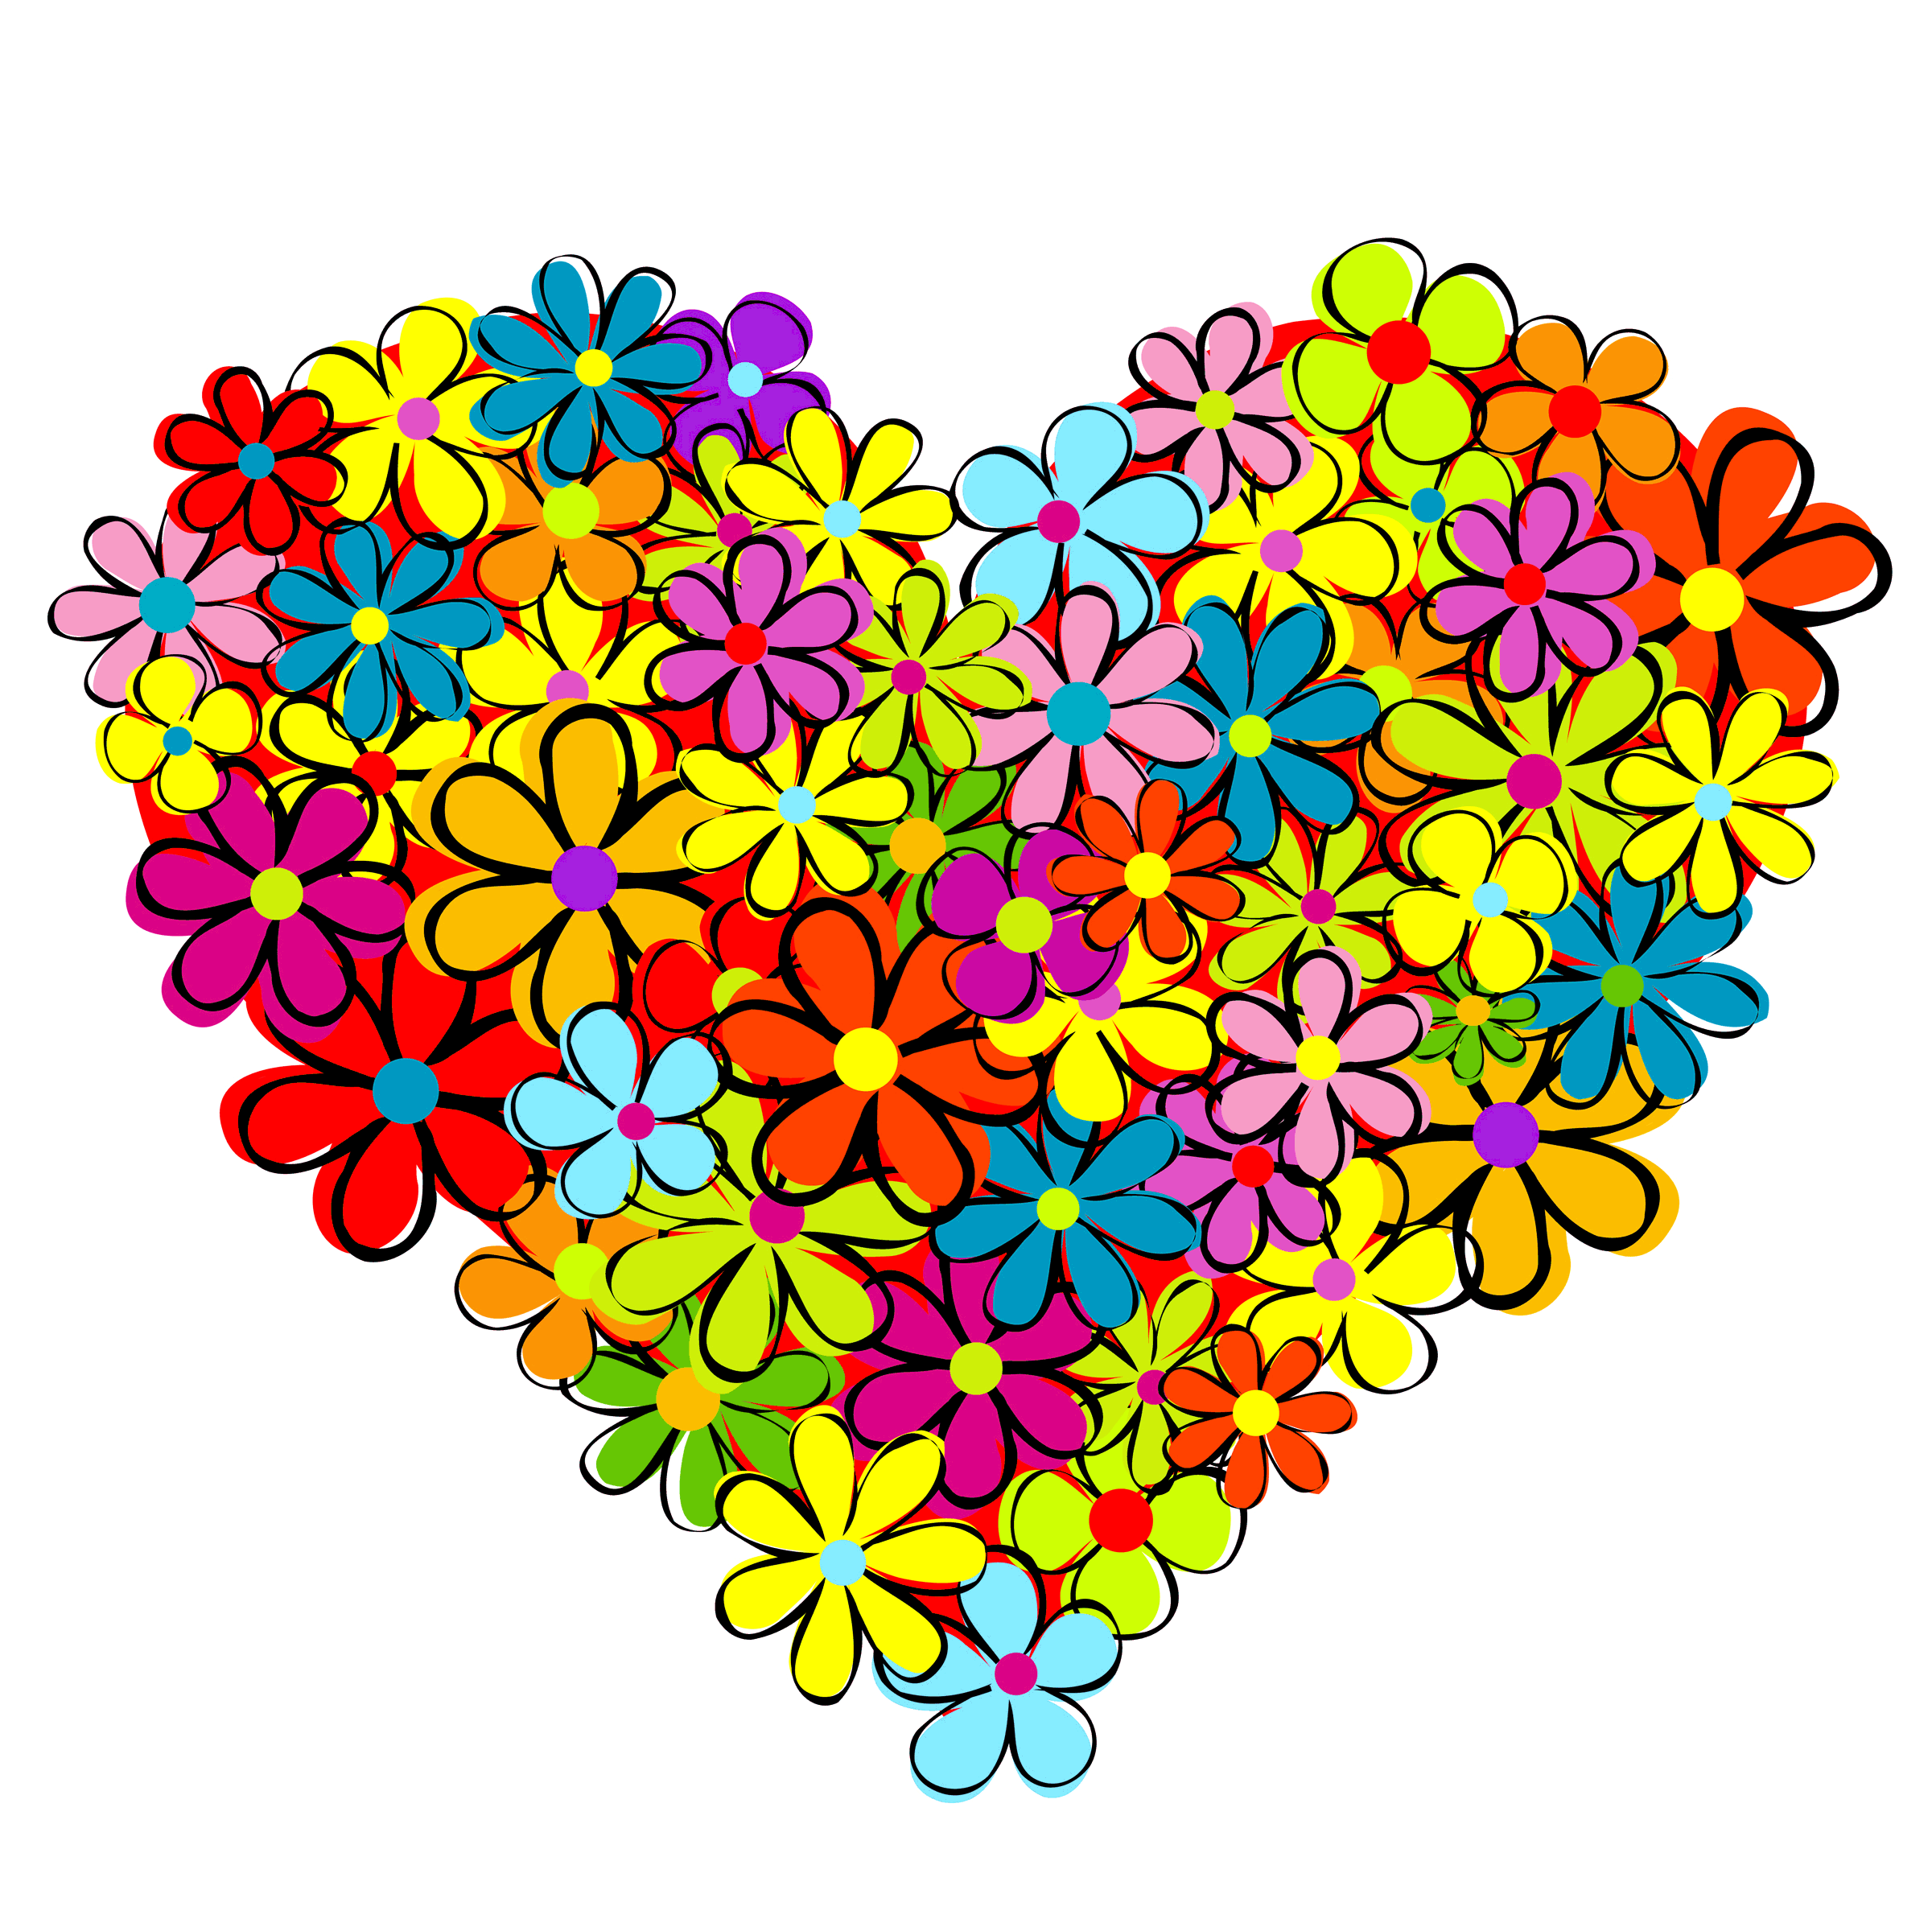 Hearts made of flowers. Heat clipart color heart